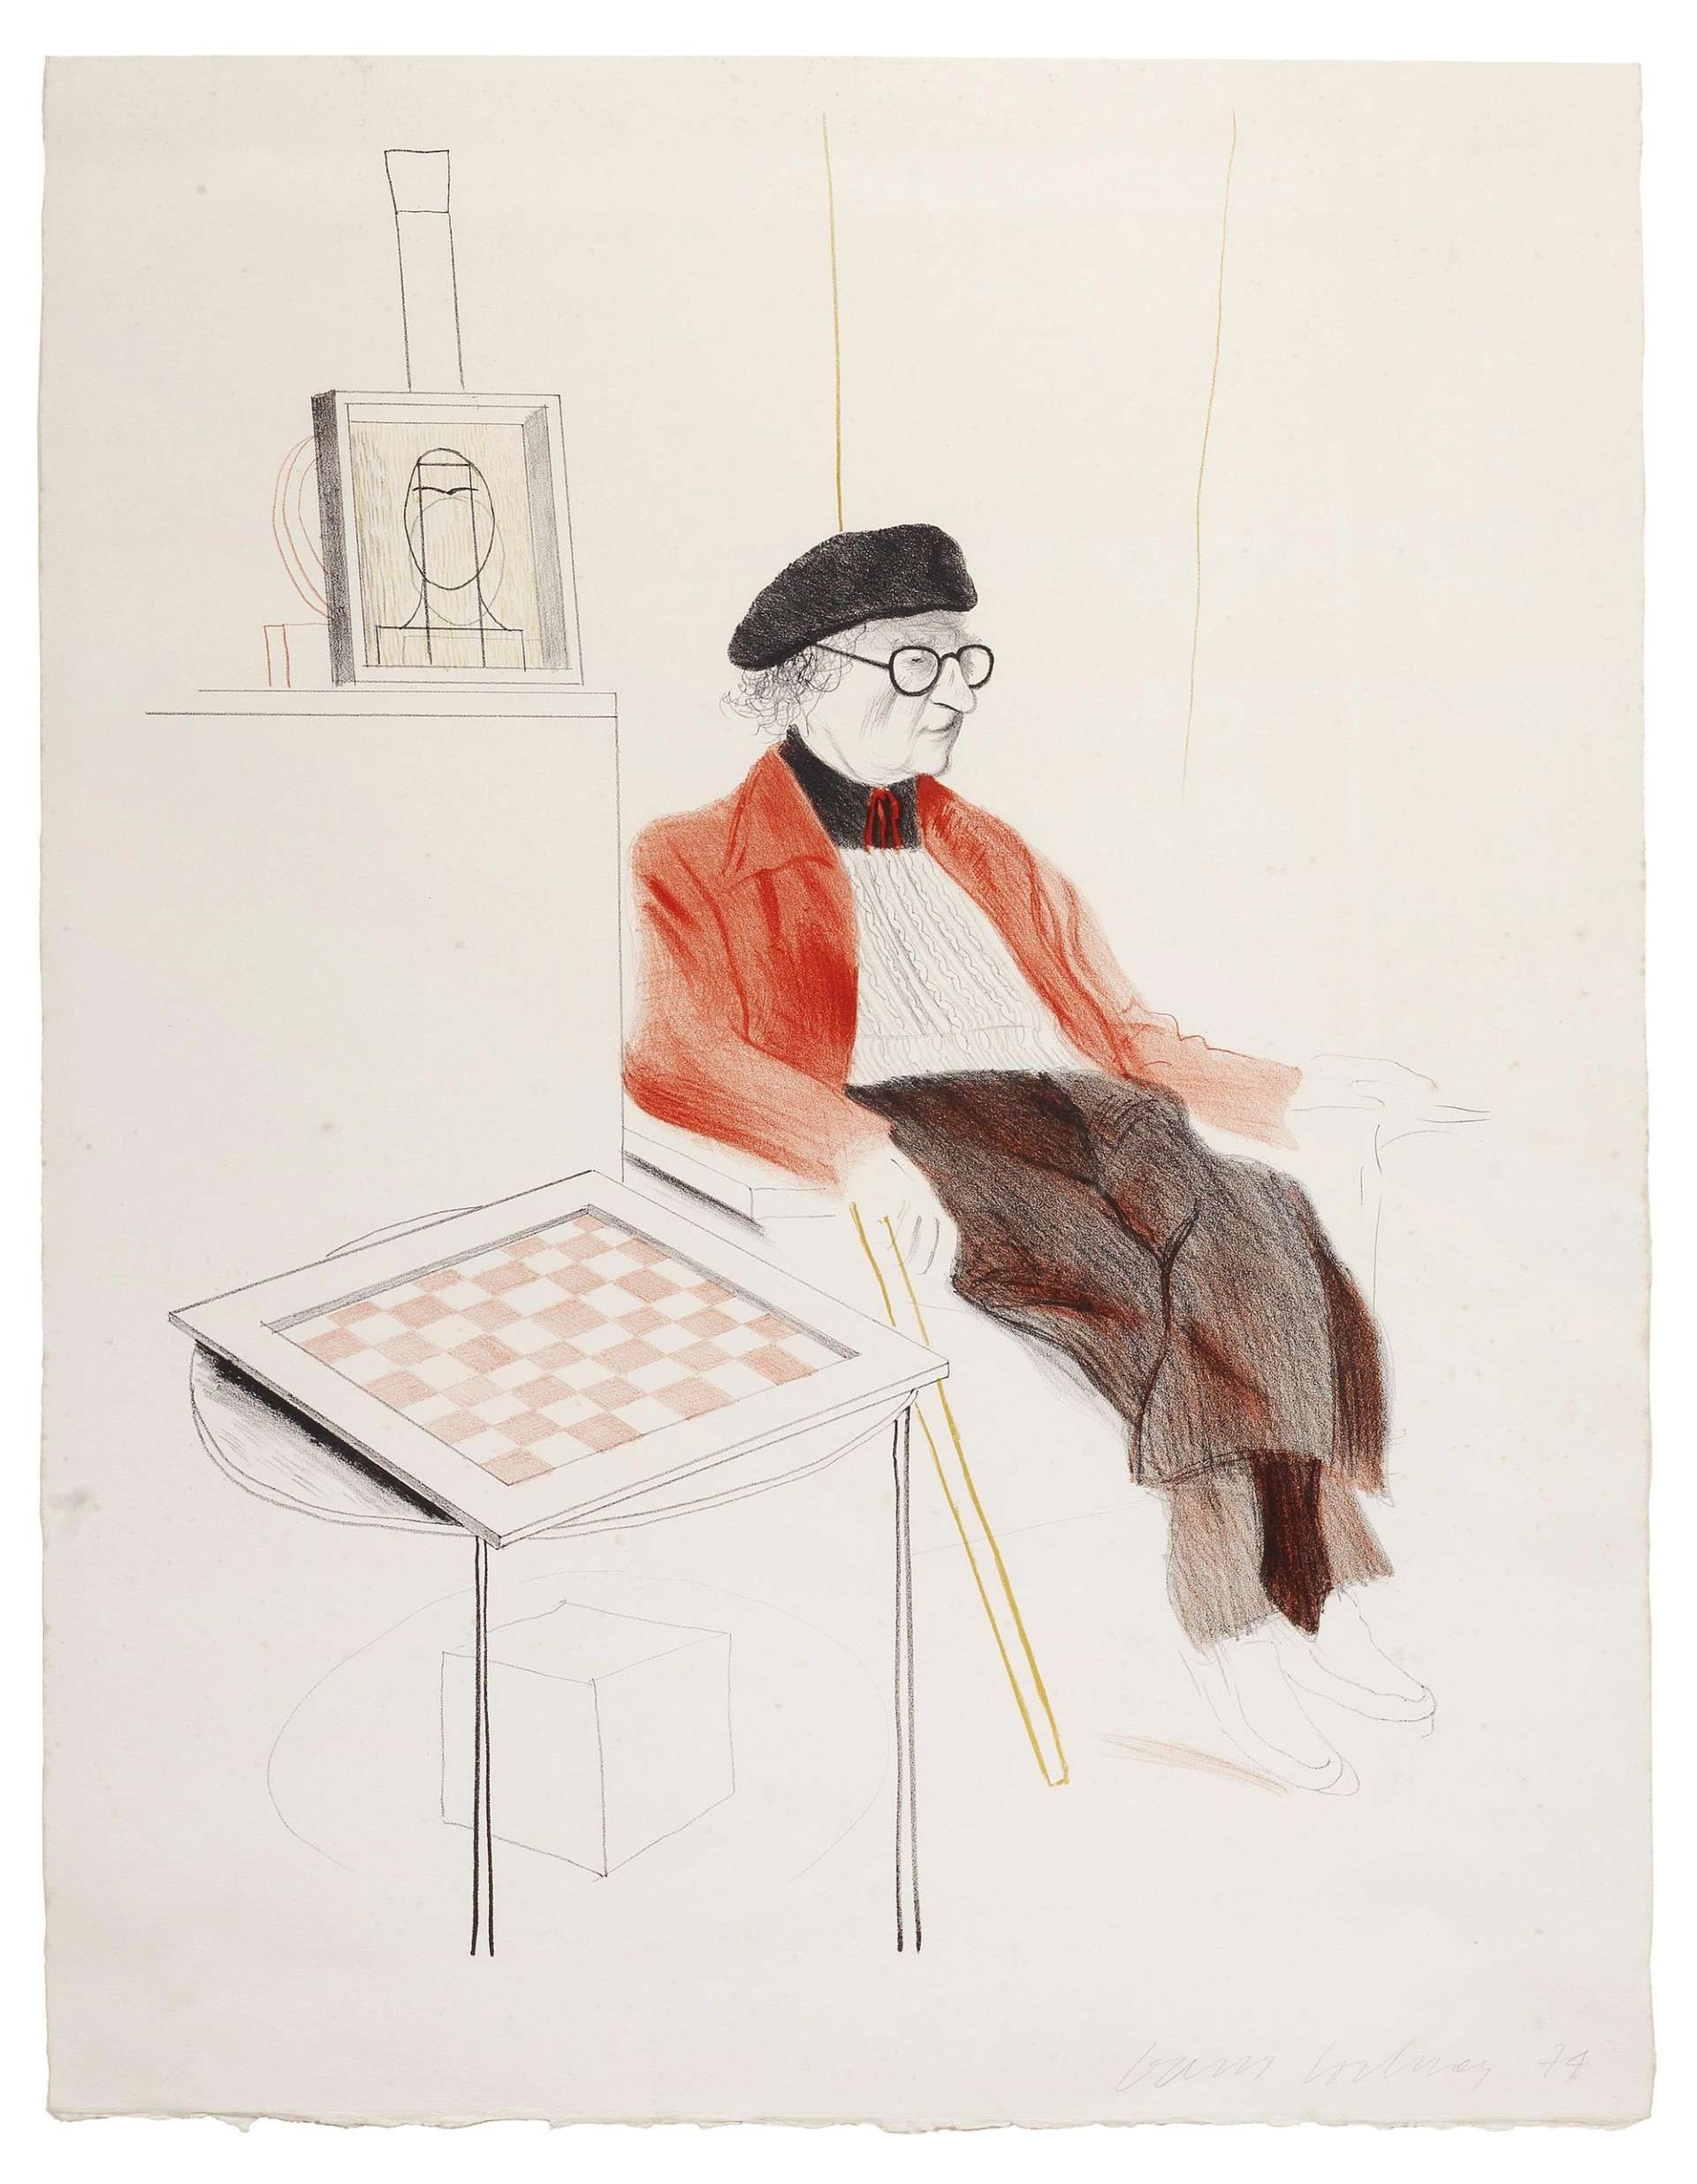 This print by Hovckney depicts Ray sitting in a chair, accompanied by his signature walking stick.